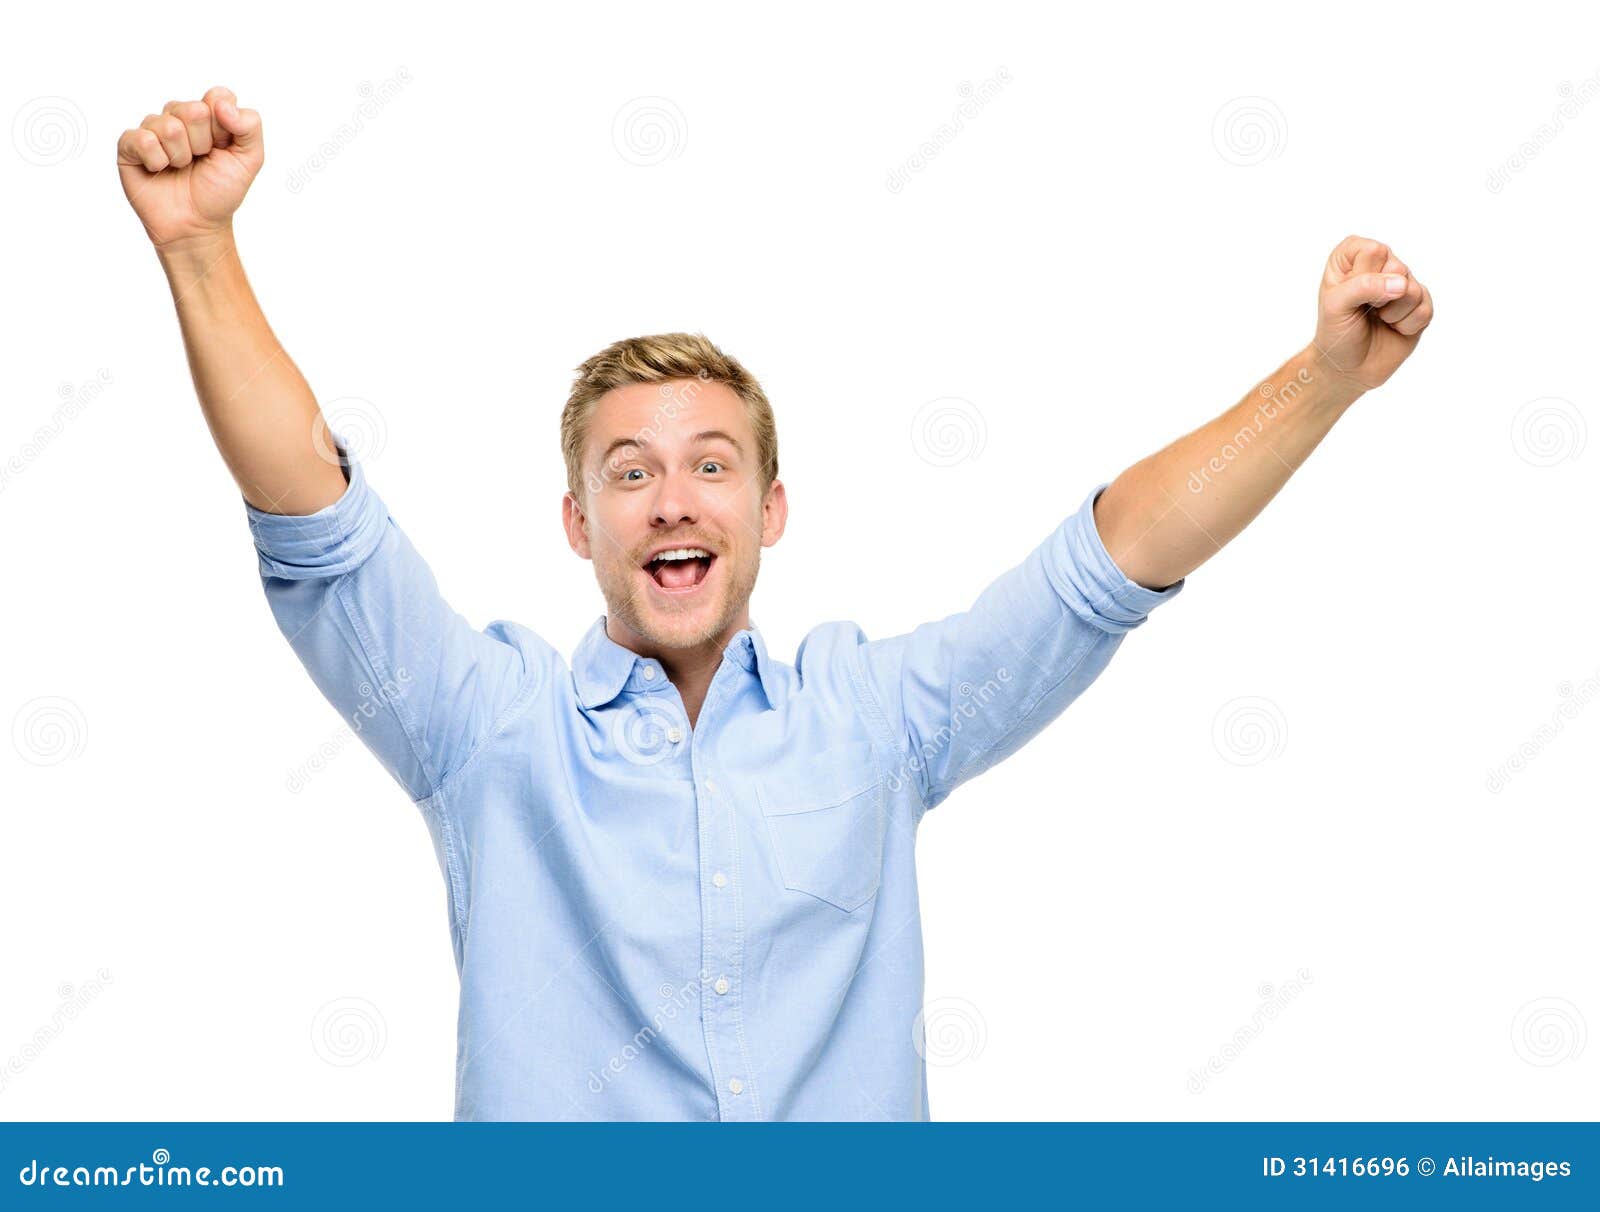 http://thumbs.dreamstime.com/z/happy-young-man-celebrating-success-white-background-31416696.jpg